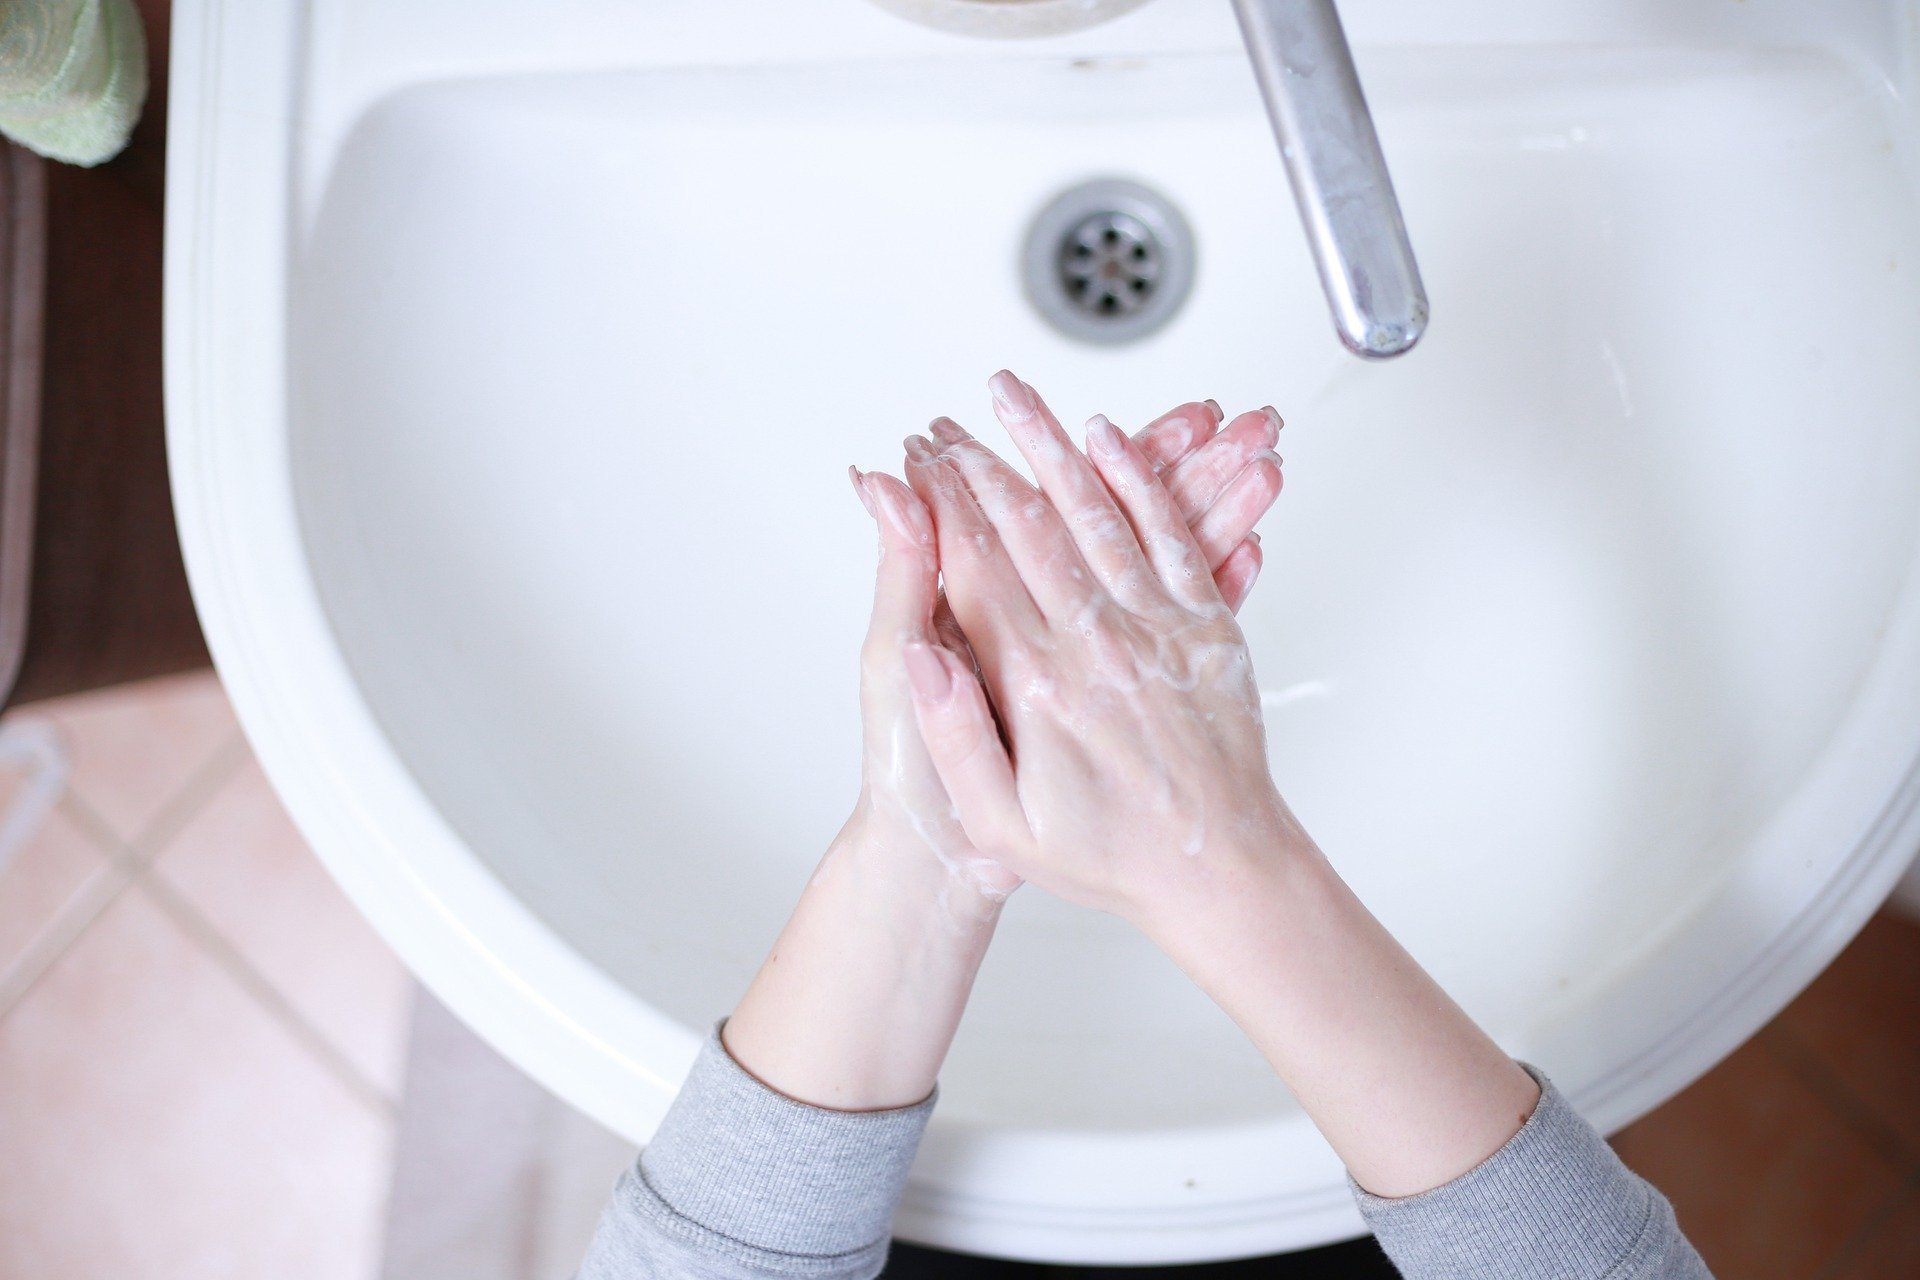 The importance of washing your hands